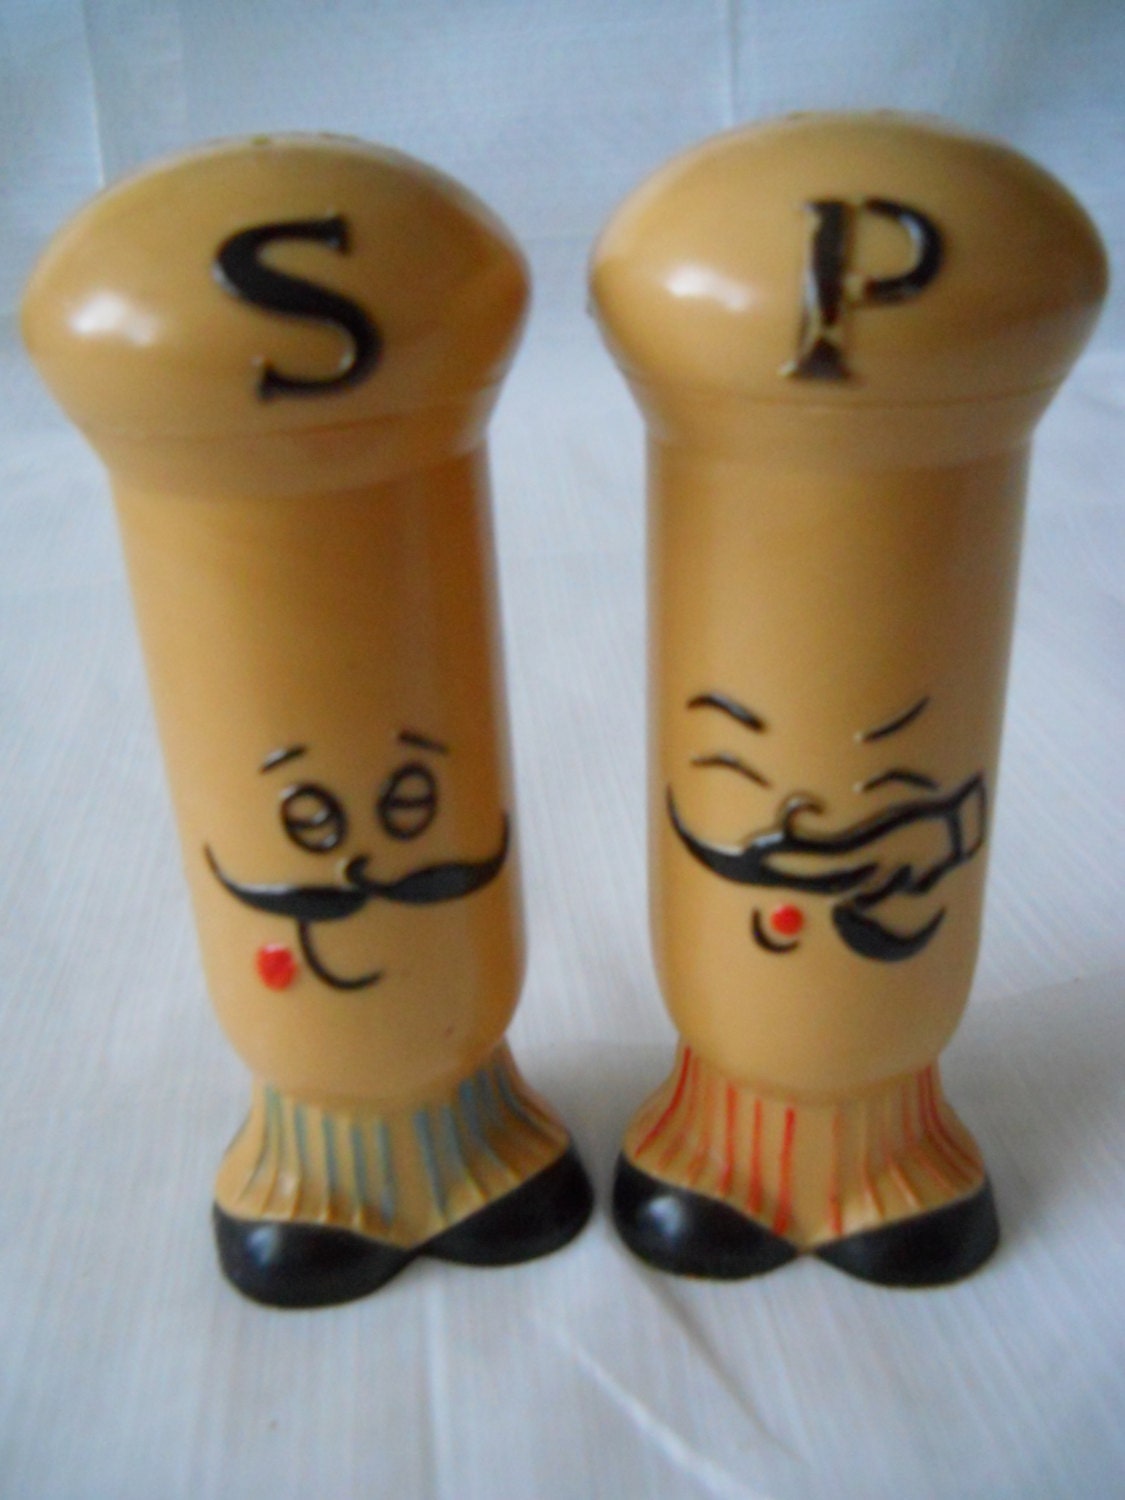 Plastic Chef Salt and Pepper Shakers vintage collectible